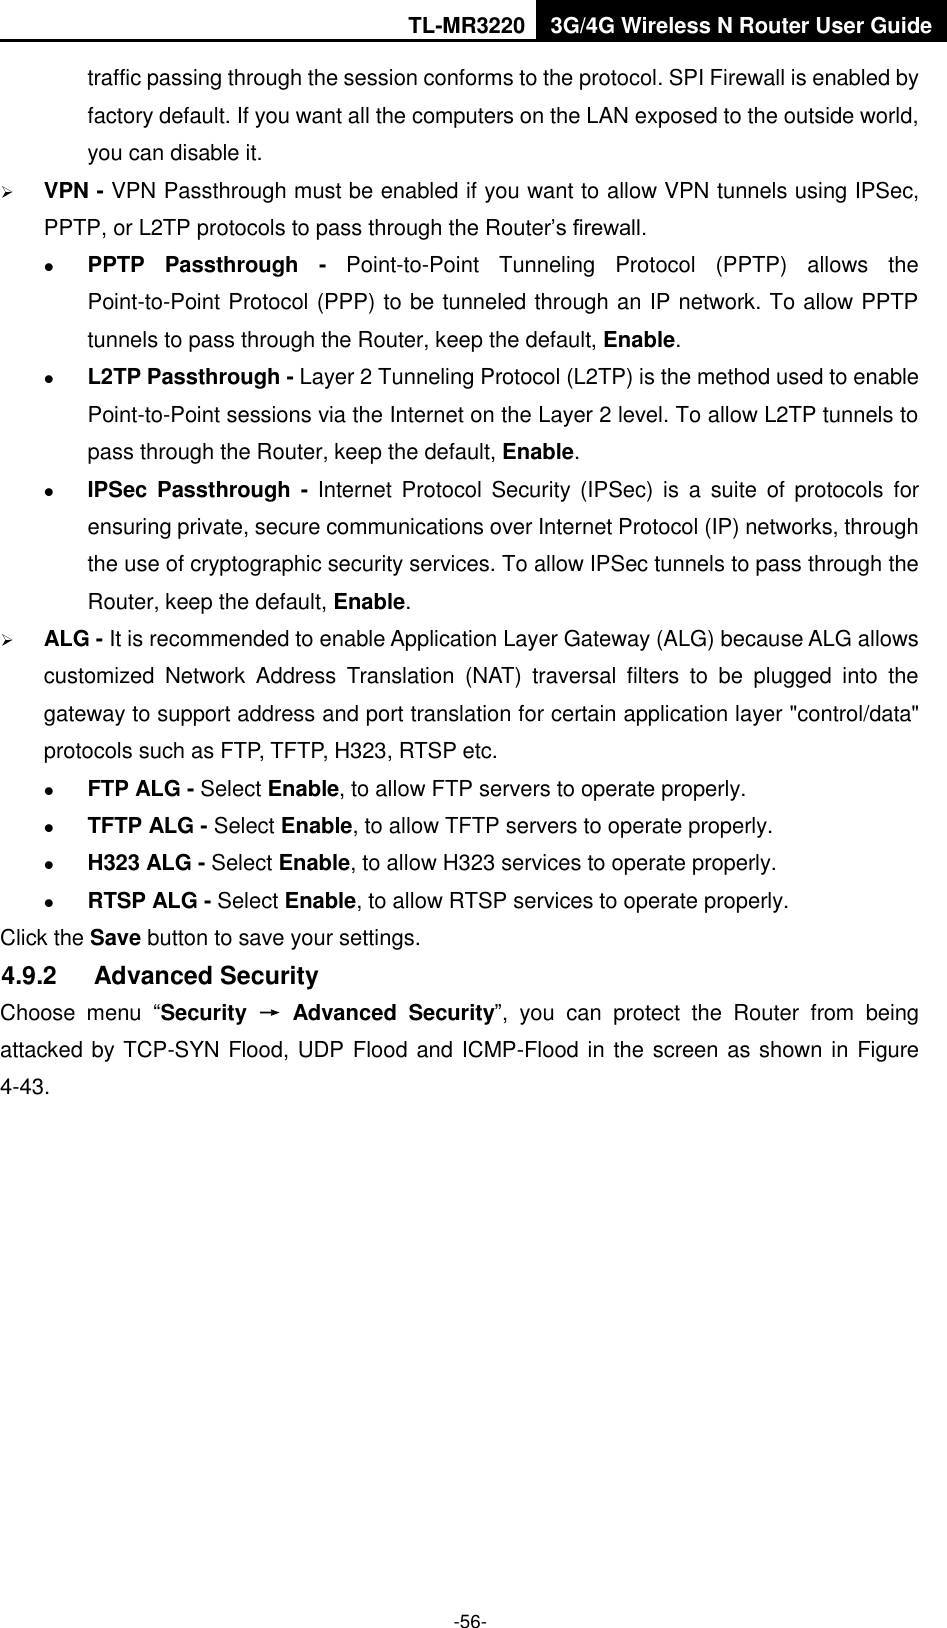 TL-MR3220 3G/4G Wireless N Router User Guide  -56- traffic passing through the session conforms to the protocol. SPI Firewall is enabled by factory default. If you want all the computers on the LAN exposed to the outside world, you can disable it.    VPN - VPN Passthrough must be enabled if you want to allow VPN tunnels using IPSec, PPTP, or L2TP protocols to pass through the Router’s firewall.  PPTP  Passthrough  -  Point-to-Point  Tunneling  Protocol  (PPTP)  allows  the Point-to-Point Protocol (PPP) to be tunneled through an IP network. To allow PPTP tunnels to pass through the Router, keep the default, Enable.  L2TP Passthrough - Layer 2 Tunneling Protocol (L2TP) is the method used to enable Point-to-Point sessions via the Internet on the Layer 2 level. To allow L2TP tunnels to pass through the Router, keep the default, Enable.  IPSec  Passthrough -  Internet  Protocol Security  (IPSec) is  a  suite  of  protocols for ensuring private, secure communications over Internet Protocol (IP) networks, through the use of cryptographic security services. To allow IPSec tunnels to pass through the Router, keep the default, Enable.  ALG - It is recommended to enable Application Layer Gateway (ALG) because ALG allows customized  Network  Address  Translation  (NAT)  traversal  filters  to  be  plugged  into  the gateway to support address and port translation for certain application layer &quot;control/data&quot; protocols such as FTP, TFTP, H323, RTSP etc.    FTP ALG - Select Enable, to allow FTP servers to operate properly.  TFTP ALG - Select Enable, to allow TFTP servers to operate properly.  H323 ALG - Select Enable, to allow H323 services to operate properly.  RTSP ALG - Select Enable, to allow RTSP services to operate properly. Click the Save button to save your settings. 4.9.2  Advanced Security Choose  menu  “Security  →  Advanced  Security”,  you  can  protect  the  Router  from  being attacked by TCP-SYN Flood, UDP Flood and ICMP-Flood in the screen as shown in Figure 4-43.   